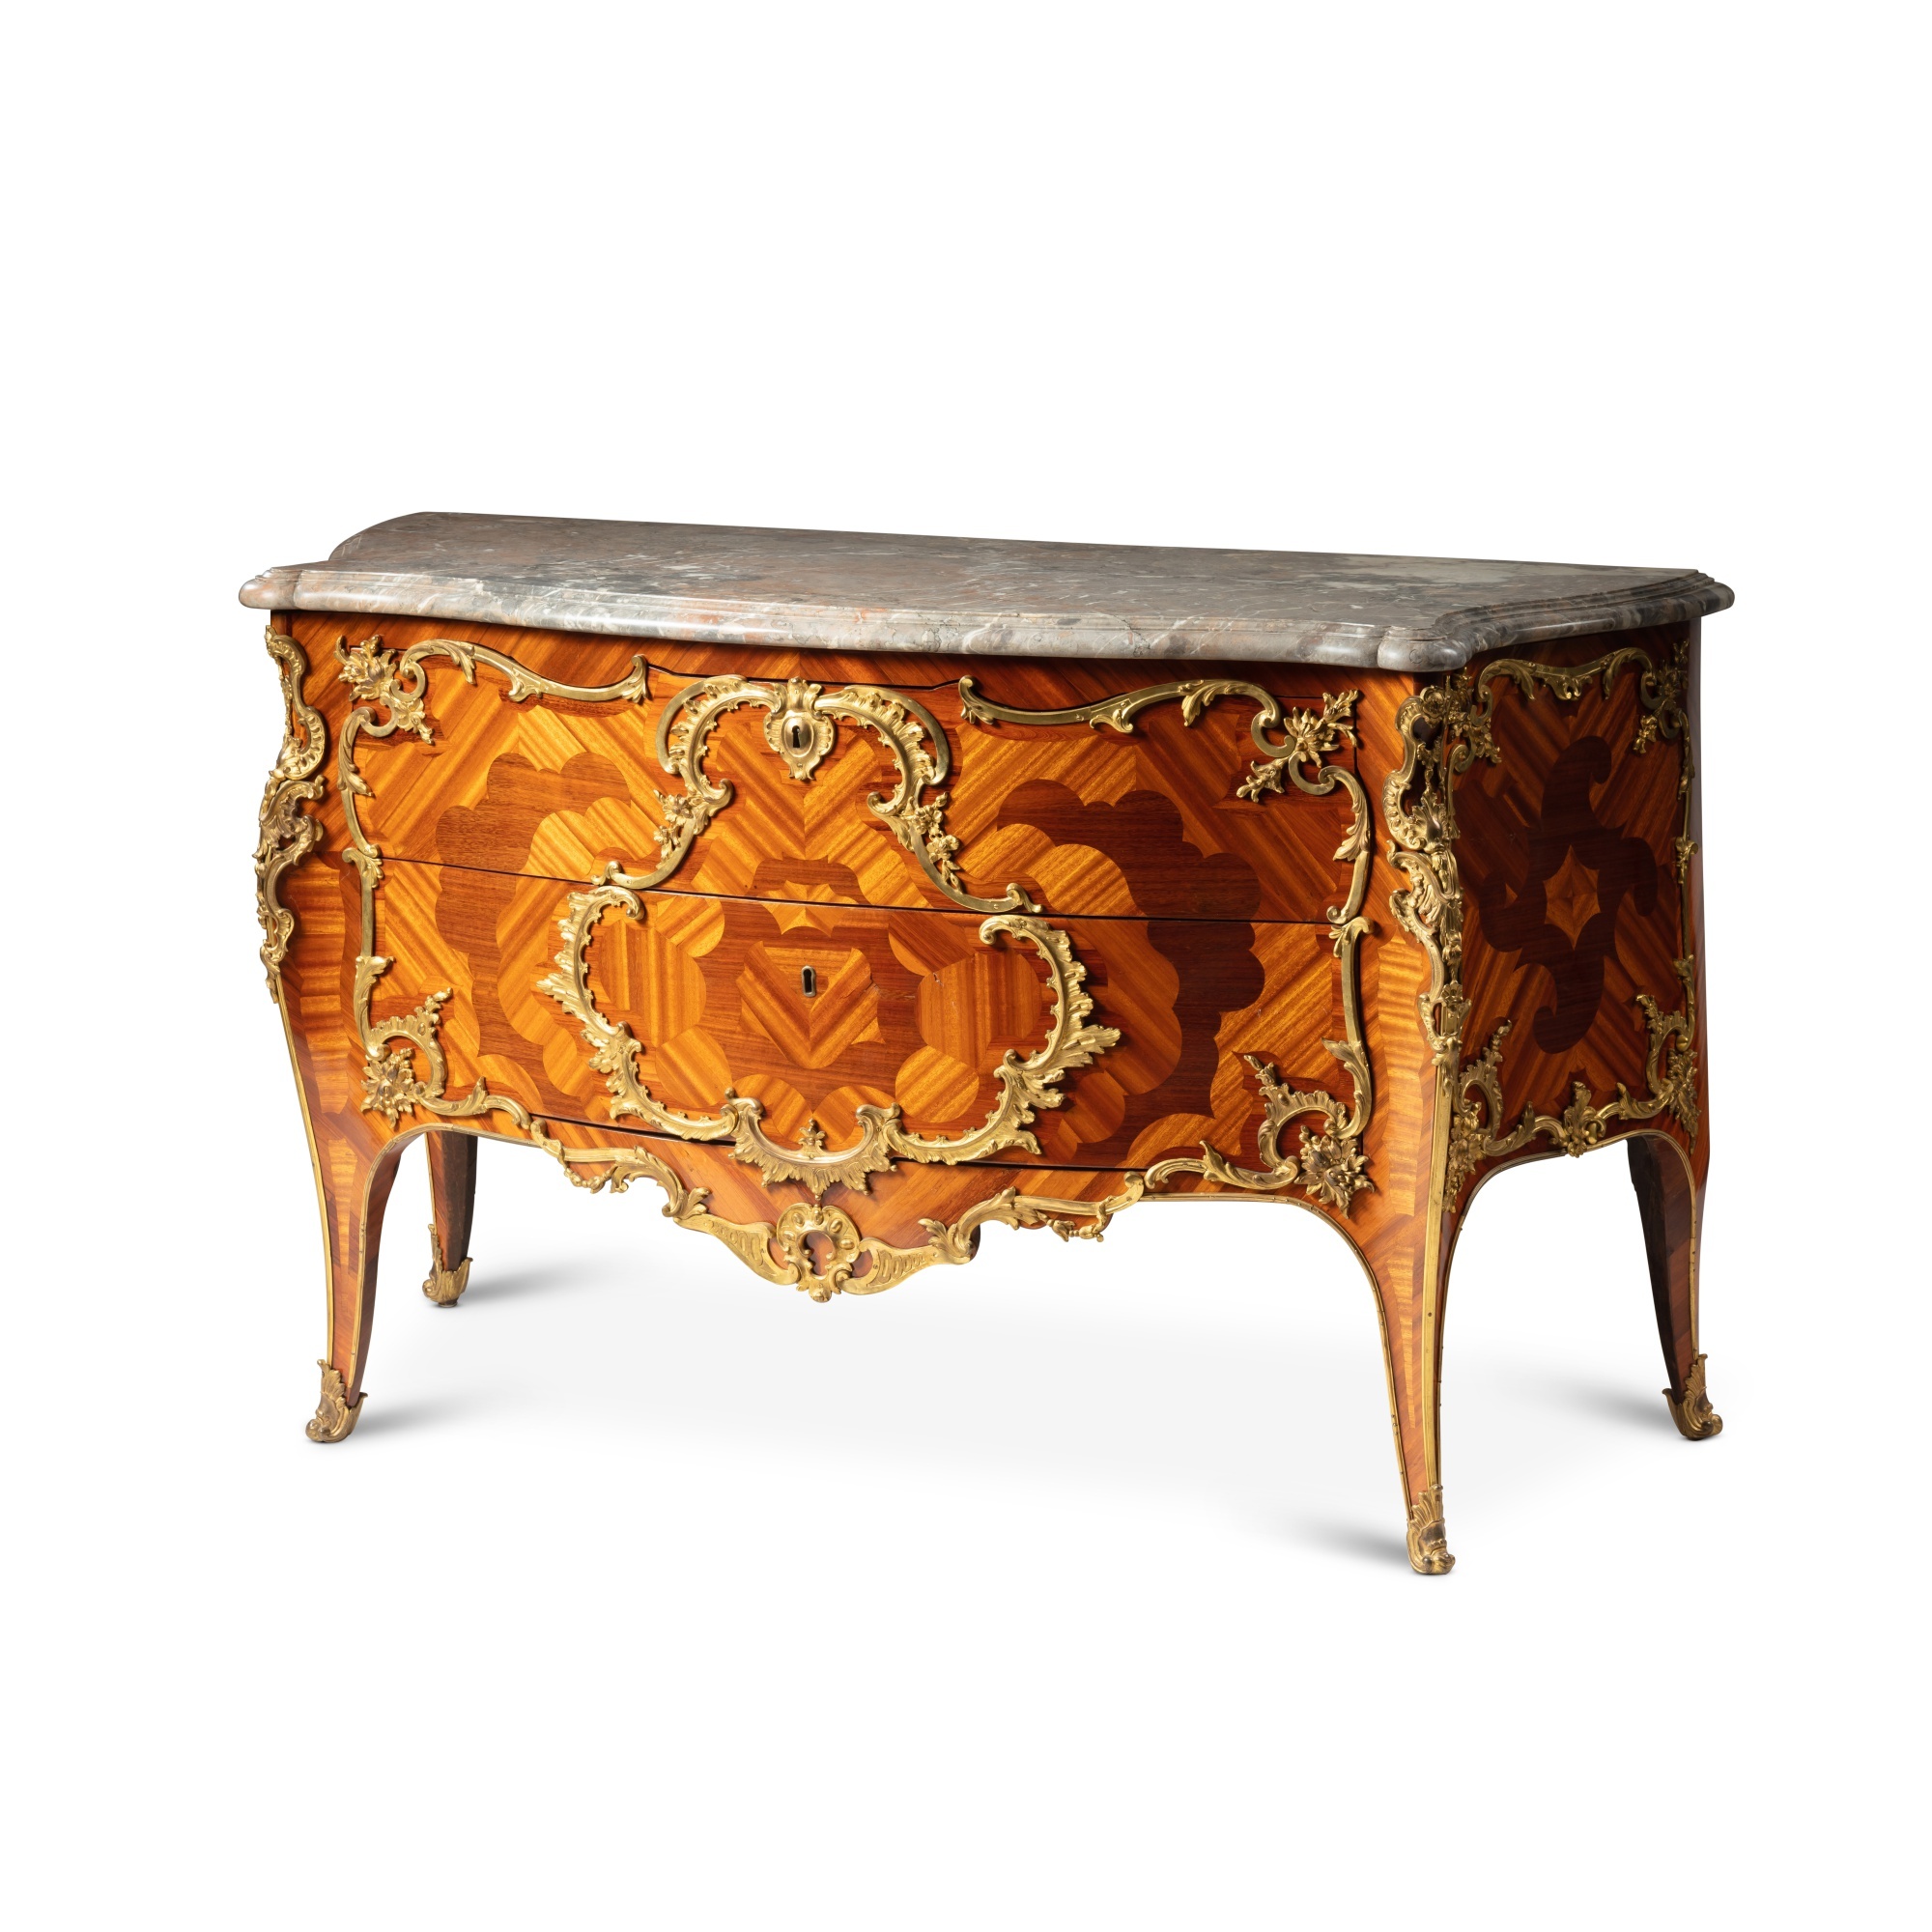 A Louis XV gilt-bronze mounted satinwood and amaranth veneered commode, circa 1750, stamped by BVRB,